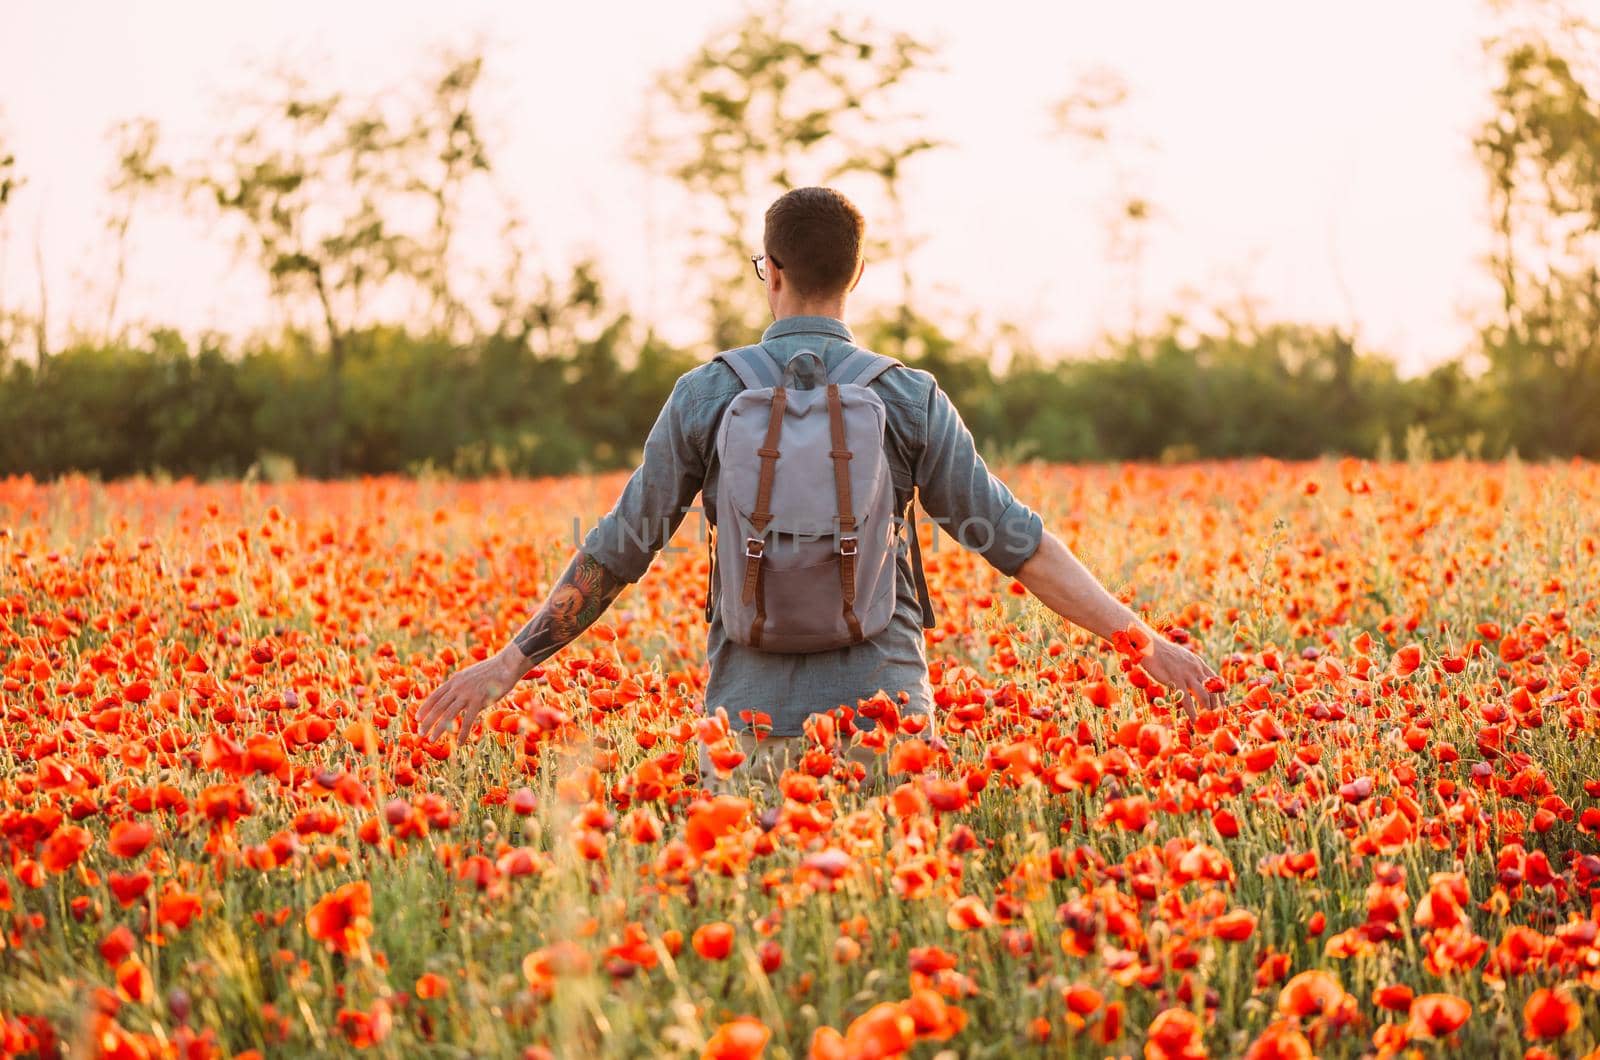 Traveler young man with backpack walking in red poppies meadow, rear view.